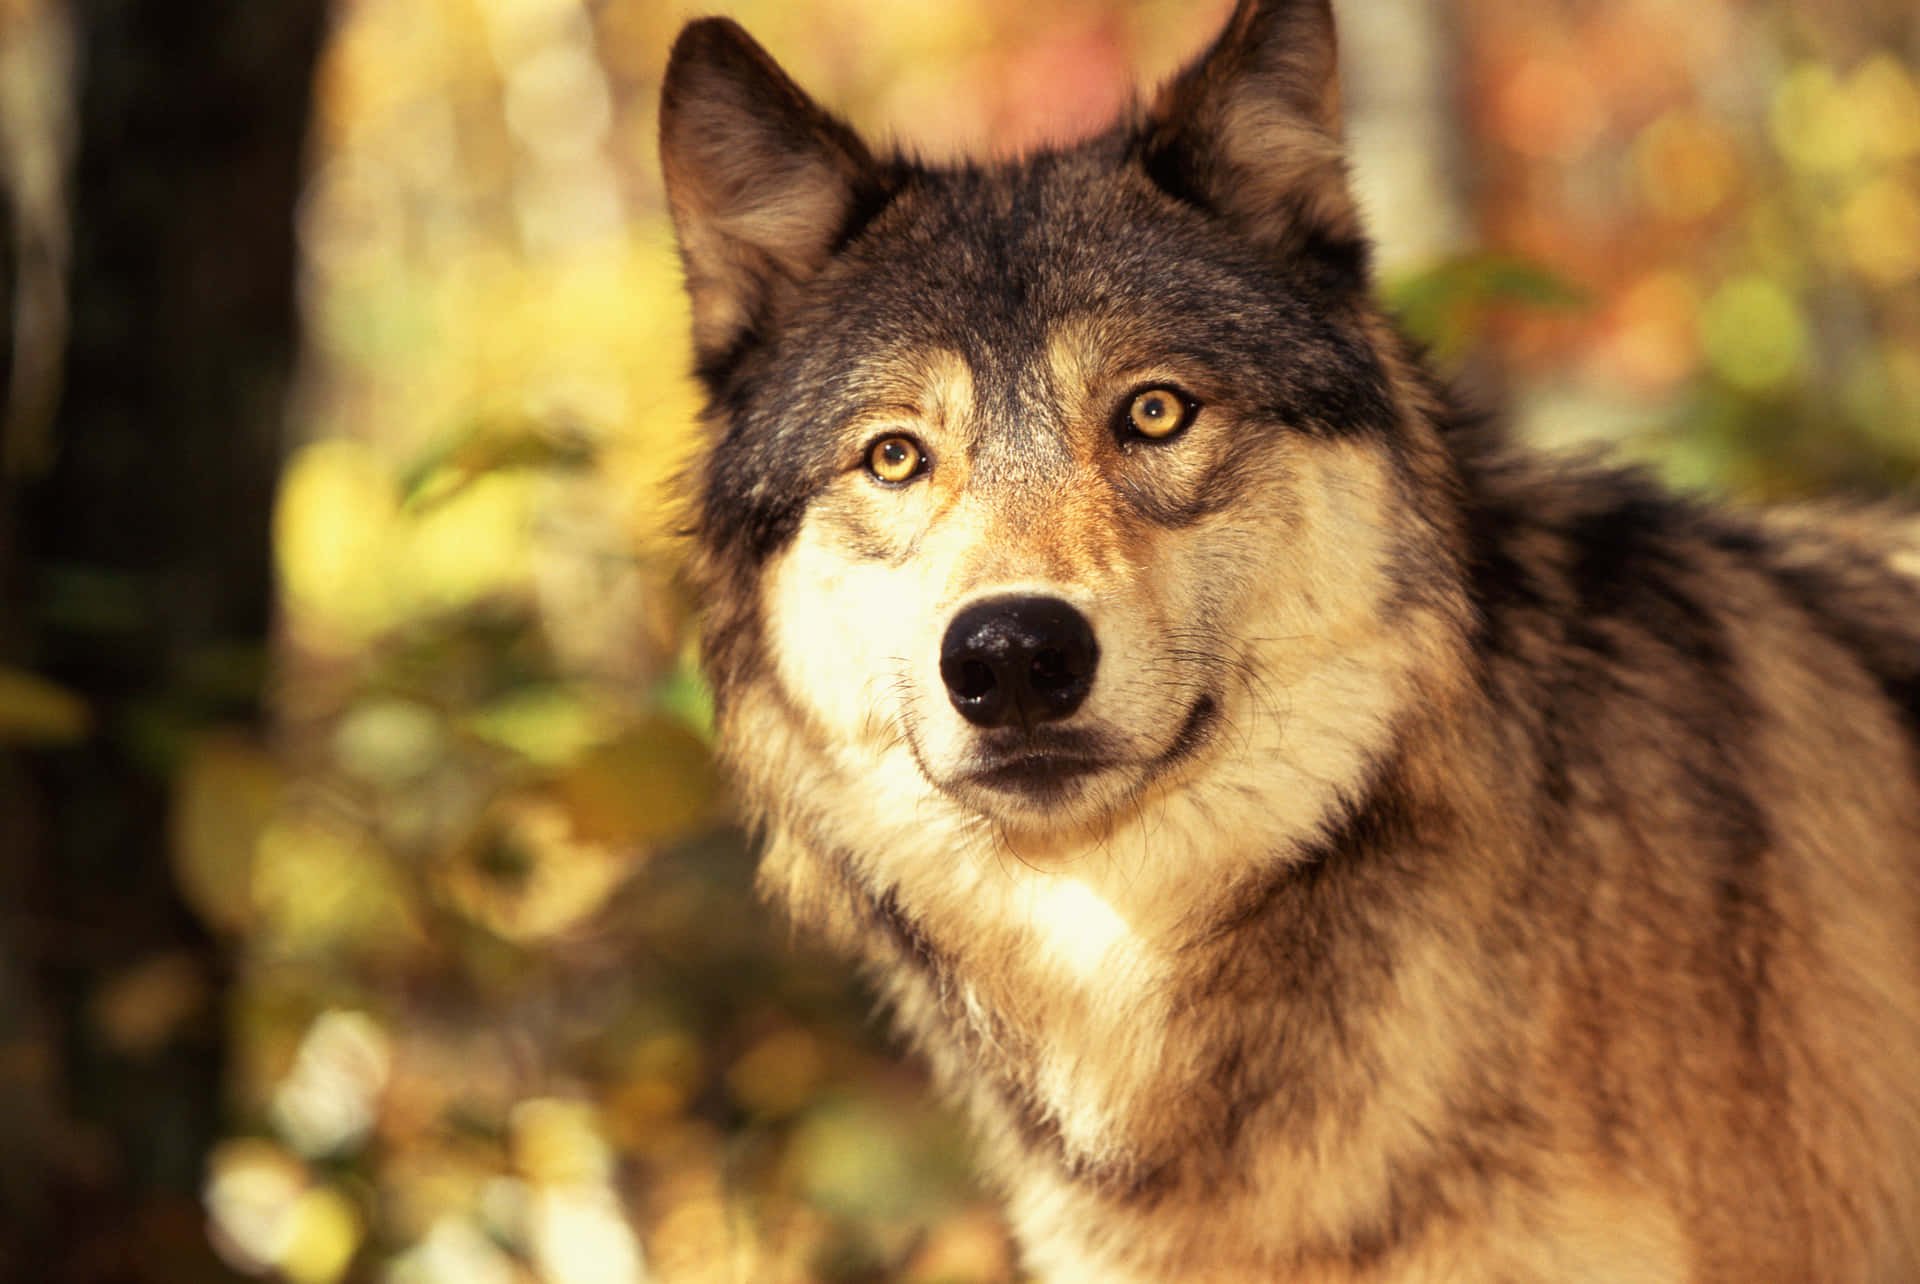 Caption: Majestic Wolf in the Wilderness Wallpaper